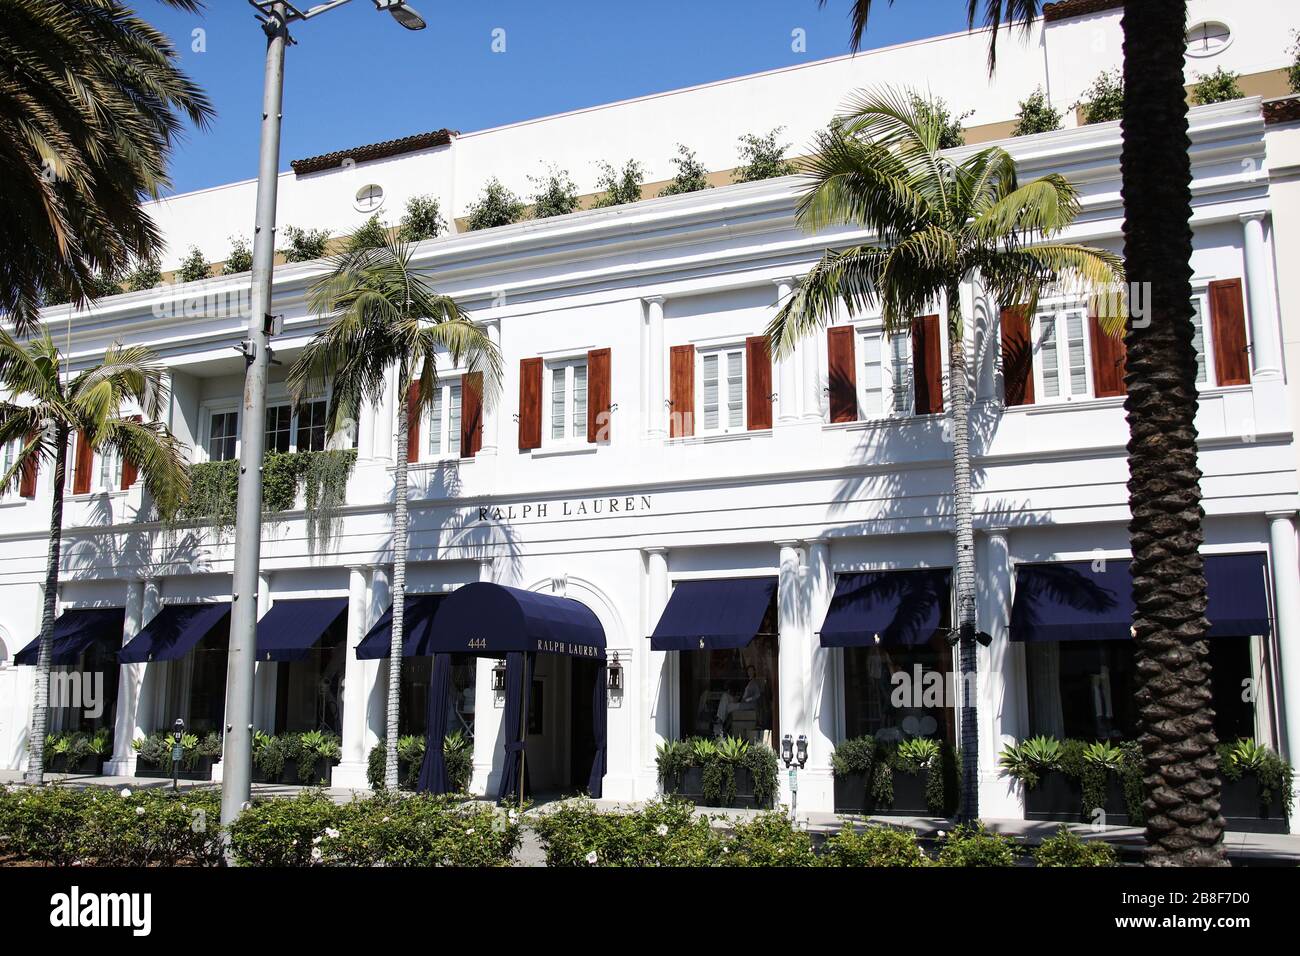 https://c8.alamy.com/comp/2B8F7D0/beverly-hills-los-angeles-california-usa-march-21-ralph-lauren-beverly-hills-rodeo-drive-store-temporarily-closed-due-to-the-coronavirus-two-days-after-the-safer-at-home-order-issued-by-both-los-angeles-mayor-eric-garcetti-at-the-county-level-and-california-governor-gavin-newsom-at-the-state-level-on-thursday-march-19-2020-which-will-stay-in-effect-until-at-least-april-19-2020-amid-the-coronavirus-covid-19-pandemic-march-21-2020-in-beverly-hills-los-angeles-california-united-states-photo-by-xavier-collinimage-press-agency-2B8F7D0.jpg